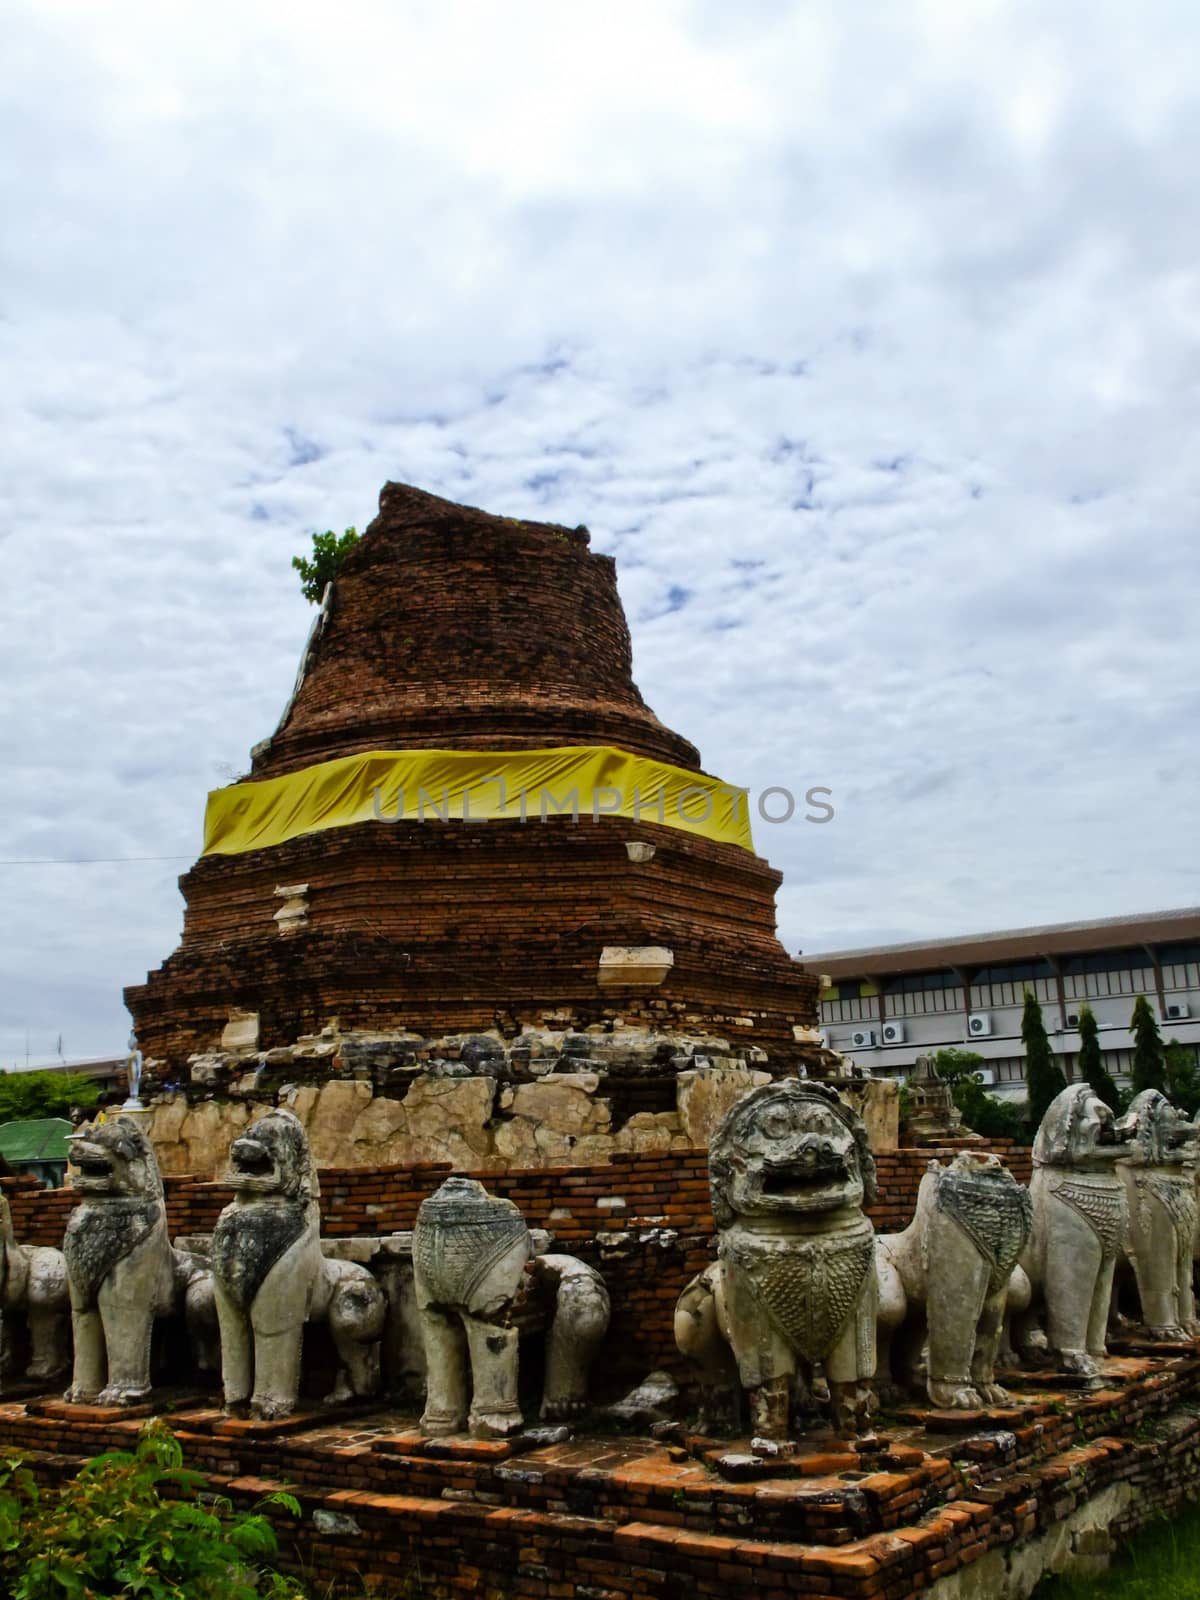 An ancient buddhist pagoda with elephant stone statues in Ayutthaya in Thailand